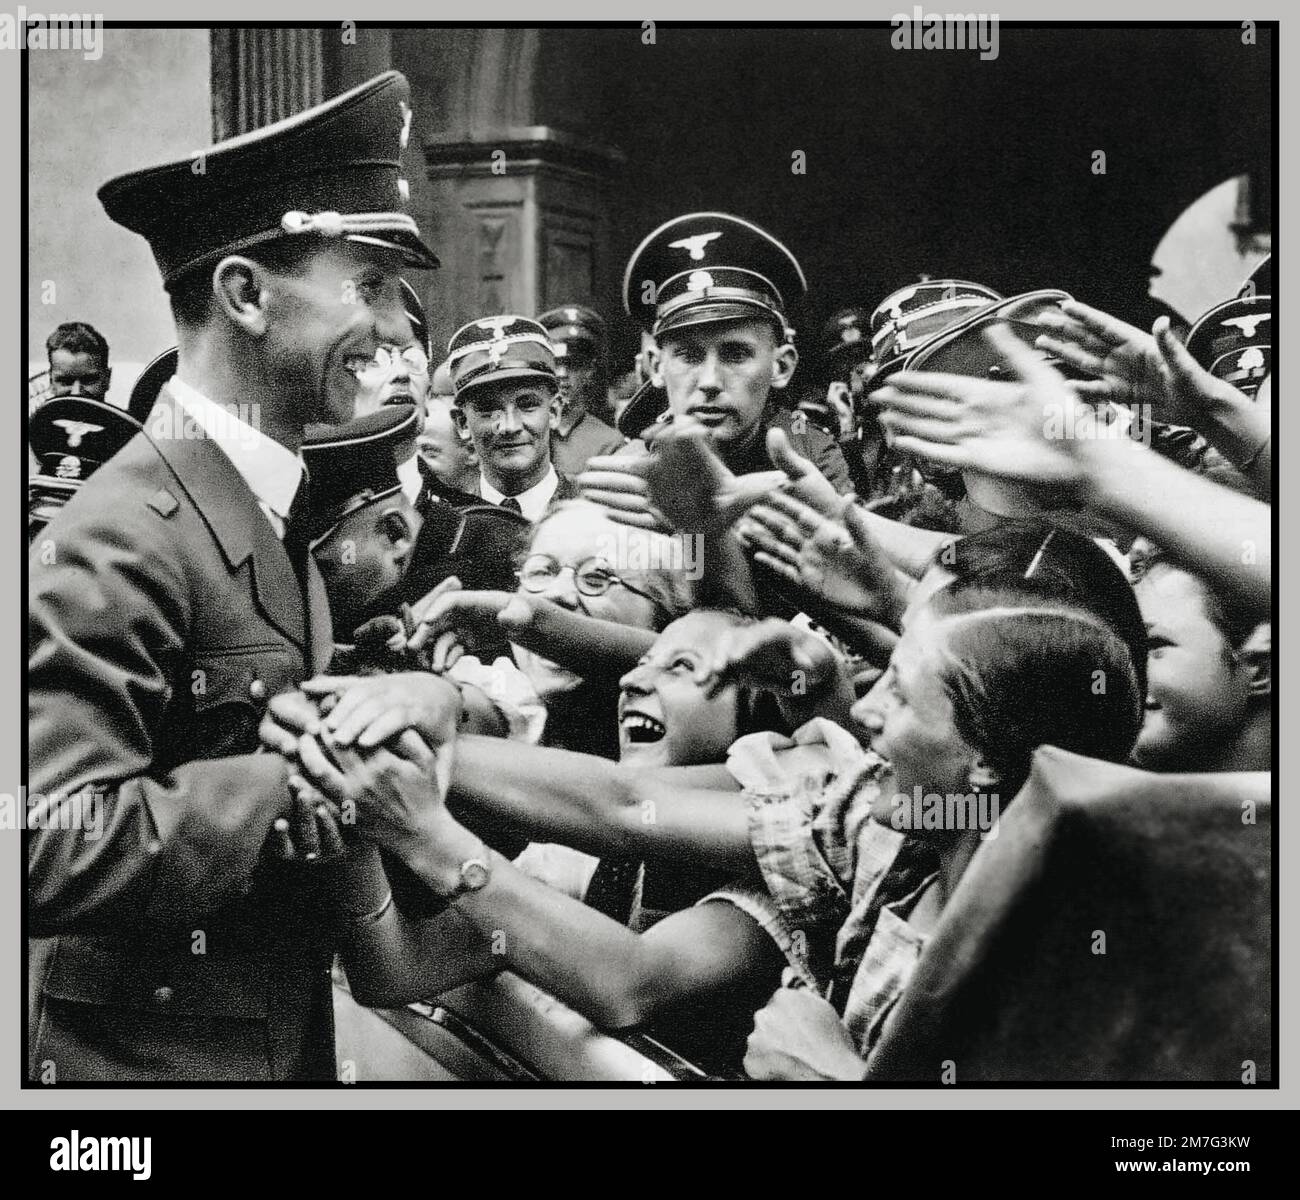 Joseph Goebbels Minister of Nazi propaganda in uniform with ecstatic female Nazi fans German Nazi politician who was the Gauleiter of Berlin, chief propagandist for the Nazi Party, and then Reich Minister of Propaganda from 1933 to 1945 1930s Nazi Germany Stock Photo